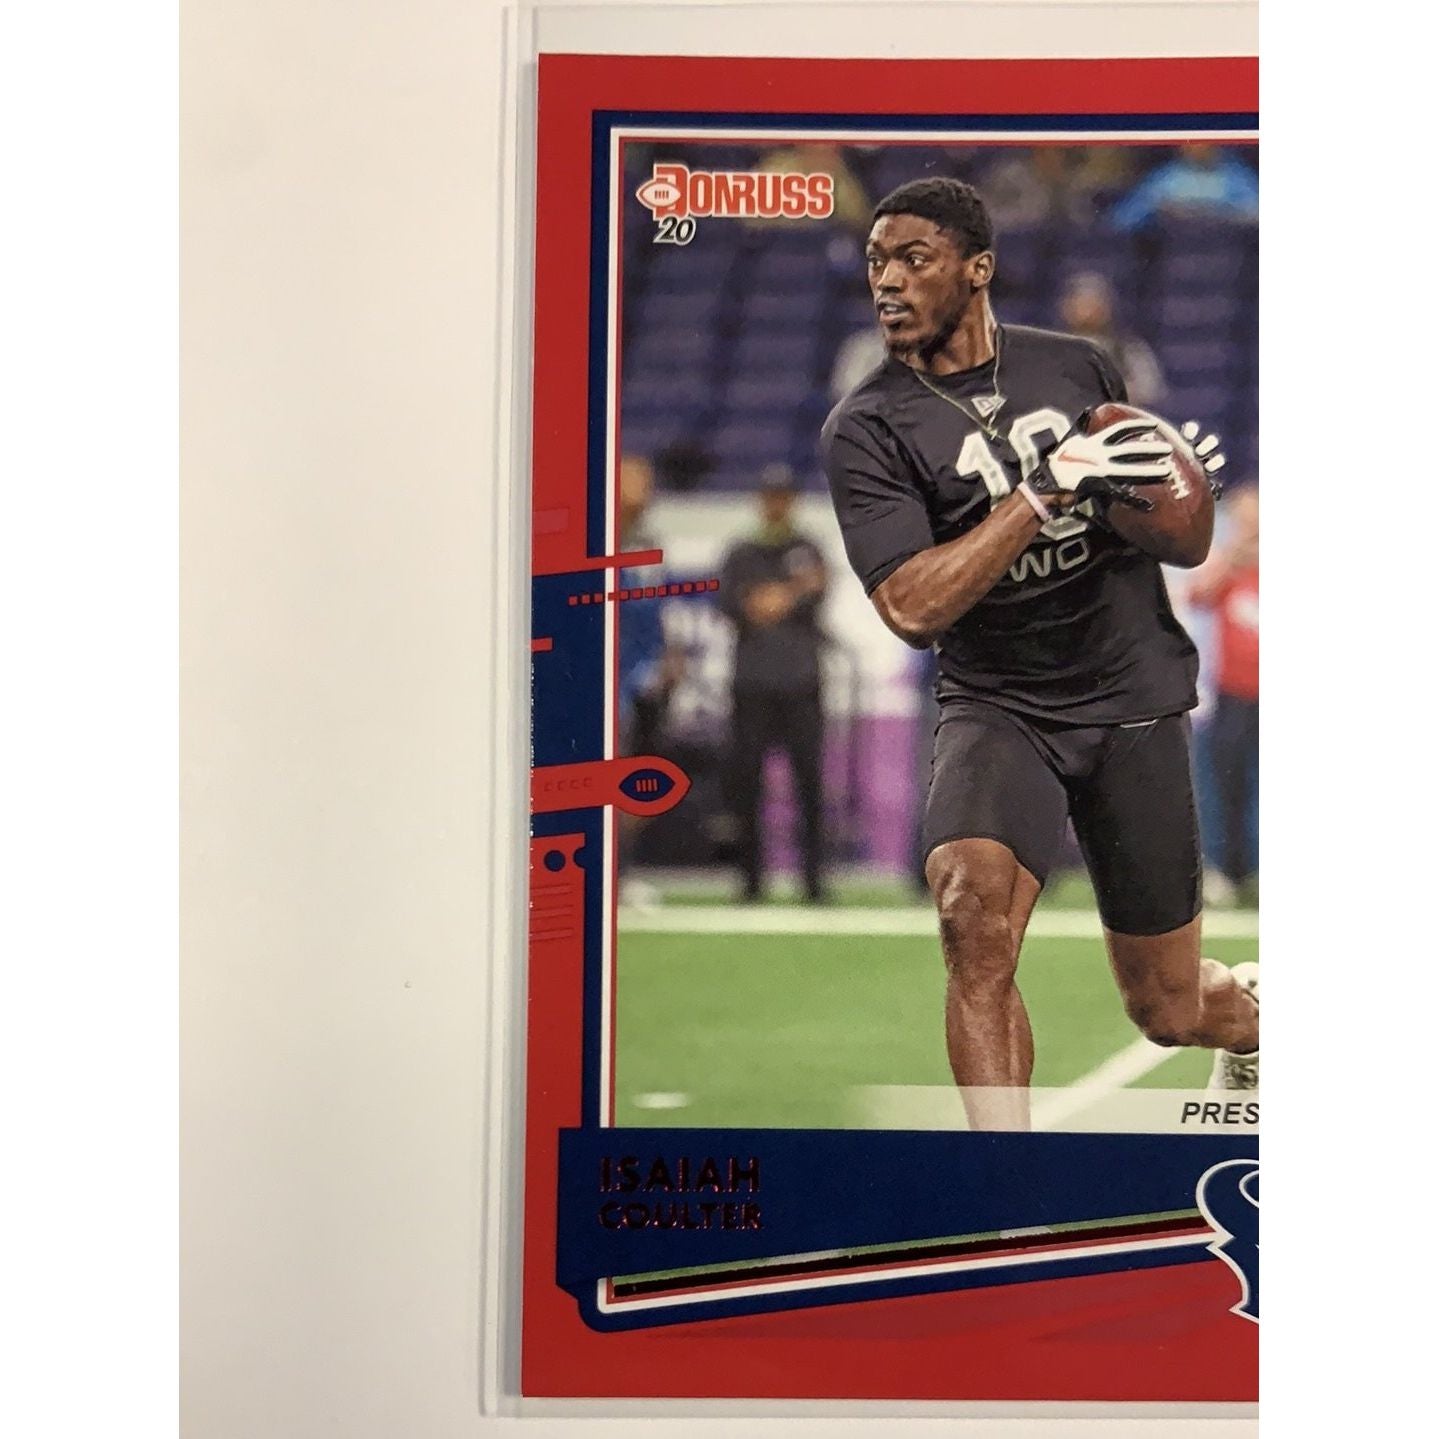  2020 Donruss Isaiah Coulter Red Press Proof RC  Local Legends Cards & Collectibles